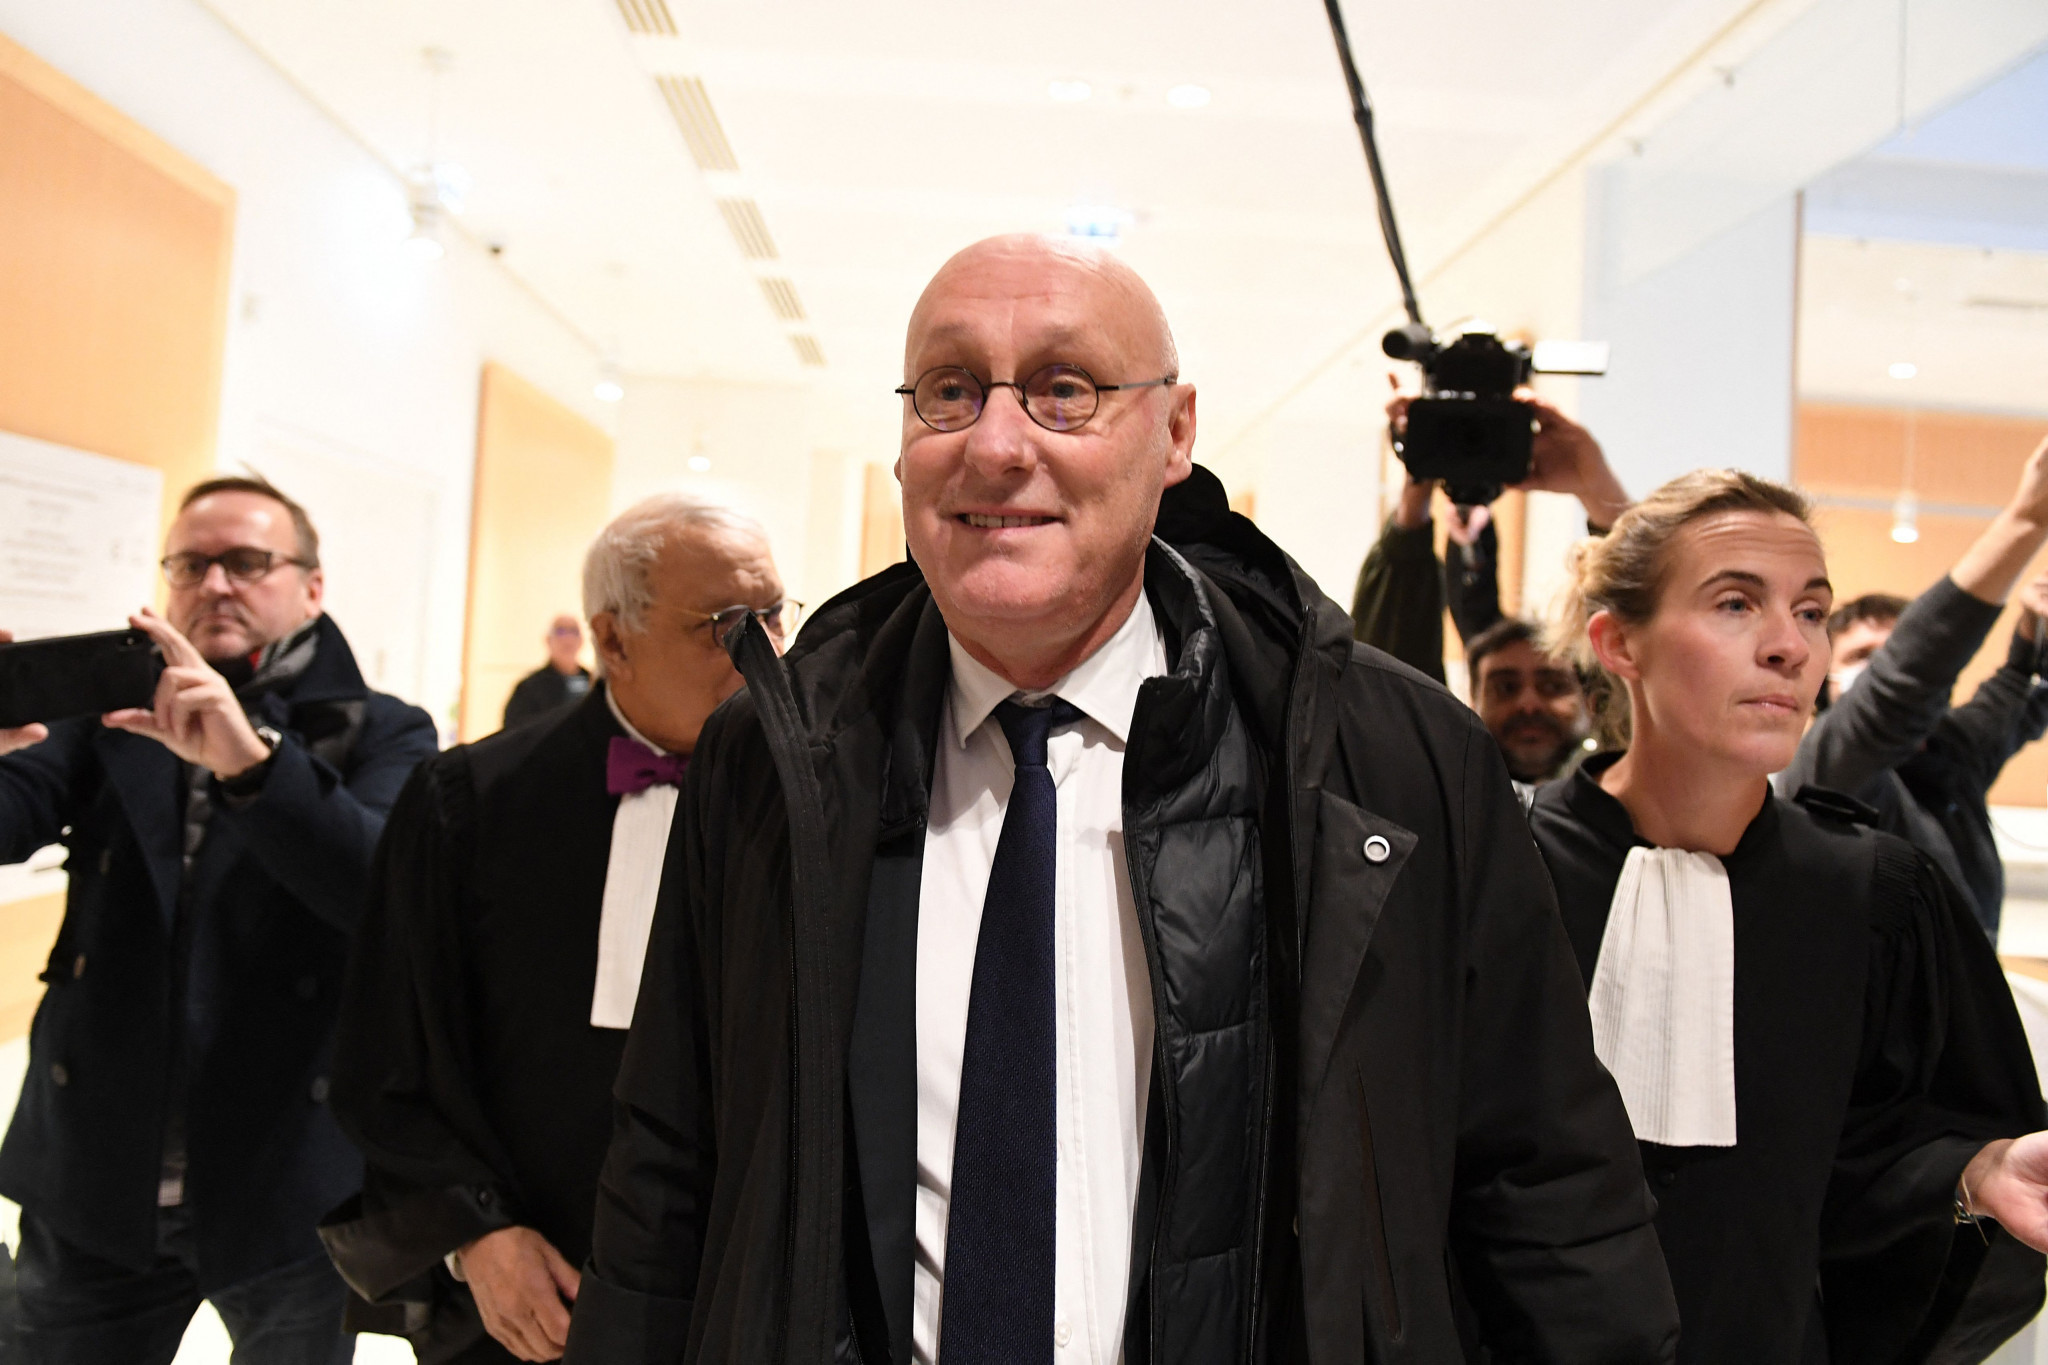 Bernard Laporte, under extreme pressure to step down as President of the French Rugby Federation after being convicted of corruption charges, has agreed to do so - but only temporarily ©Getty Images